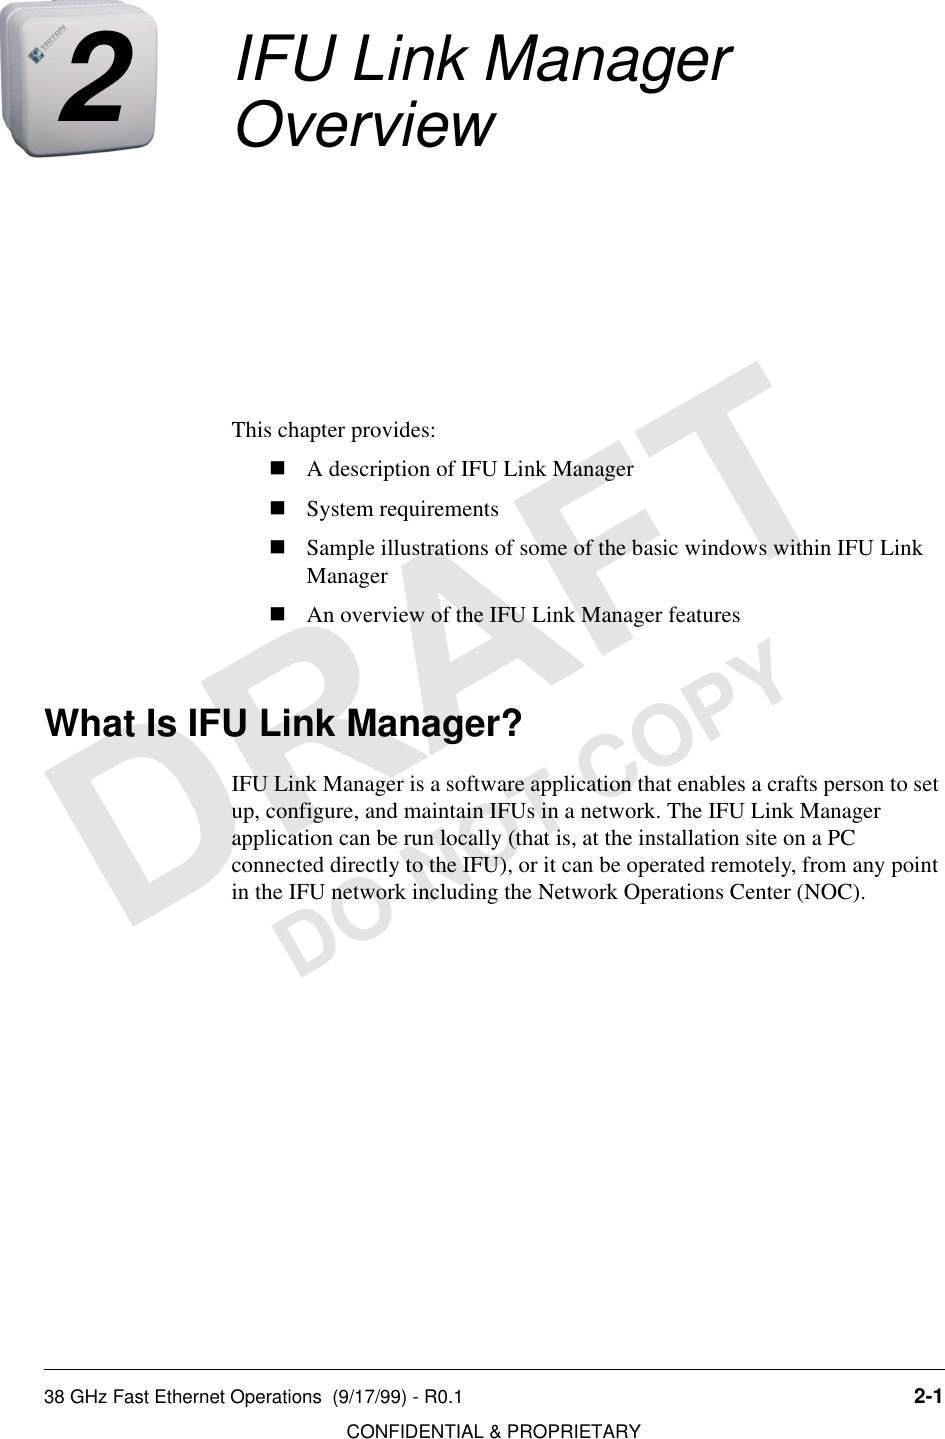 38 GHz Fast Ethernet Operations  (9/17/99) - R0.1 2-1CONFIDENTIAL &amp; PROPRIETARYDO NOT COPY2IFU Link Manager OverviewThis chapter provides:nA description of IFU Link ManagernSystem requirementsnSample illustrations of some of the basic windows within IFU Link ManagernAn overview of the IFU Link Manager featuresWhat Is IFU Link Manager?IFU Link Manager is a software application that enables a crafts person to set up, configure, and maintain IFUs in a network. The IFU Link Manager application can be run locally (that is, at the installation site on a PC connected directly to the IFU), or it can be operated remotely, from any point in the IFU network including the Network Operations Center (NOC).